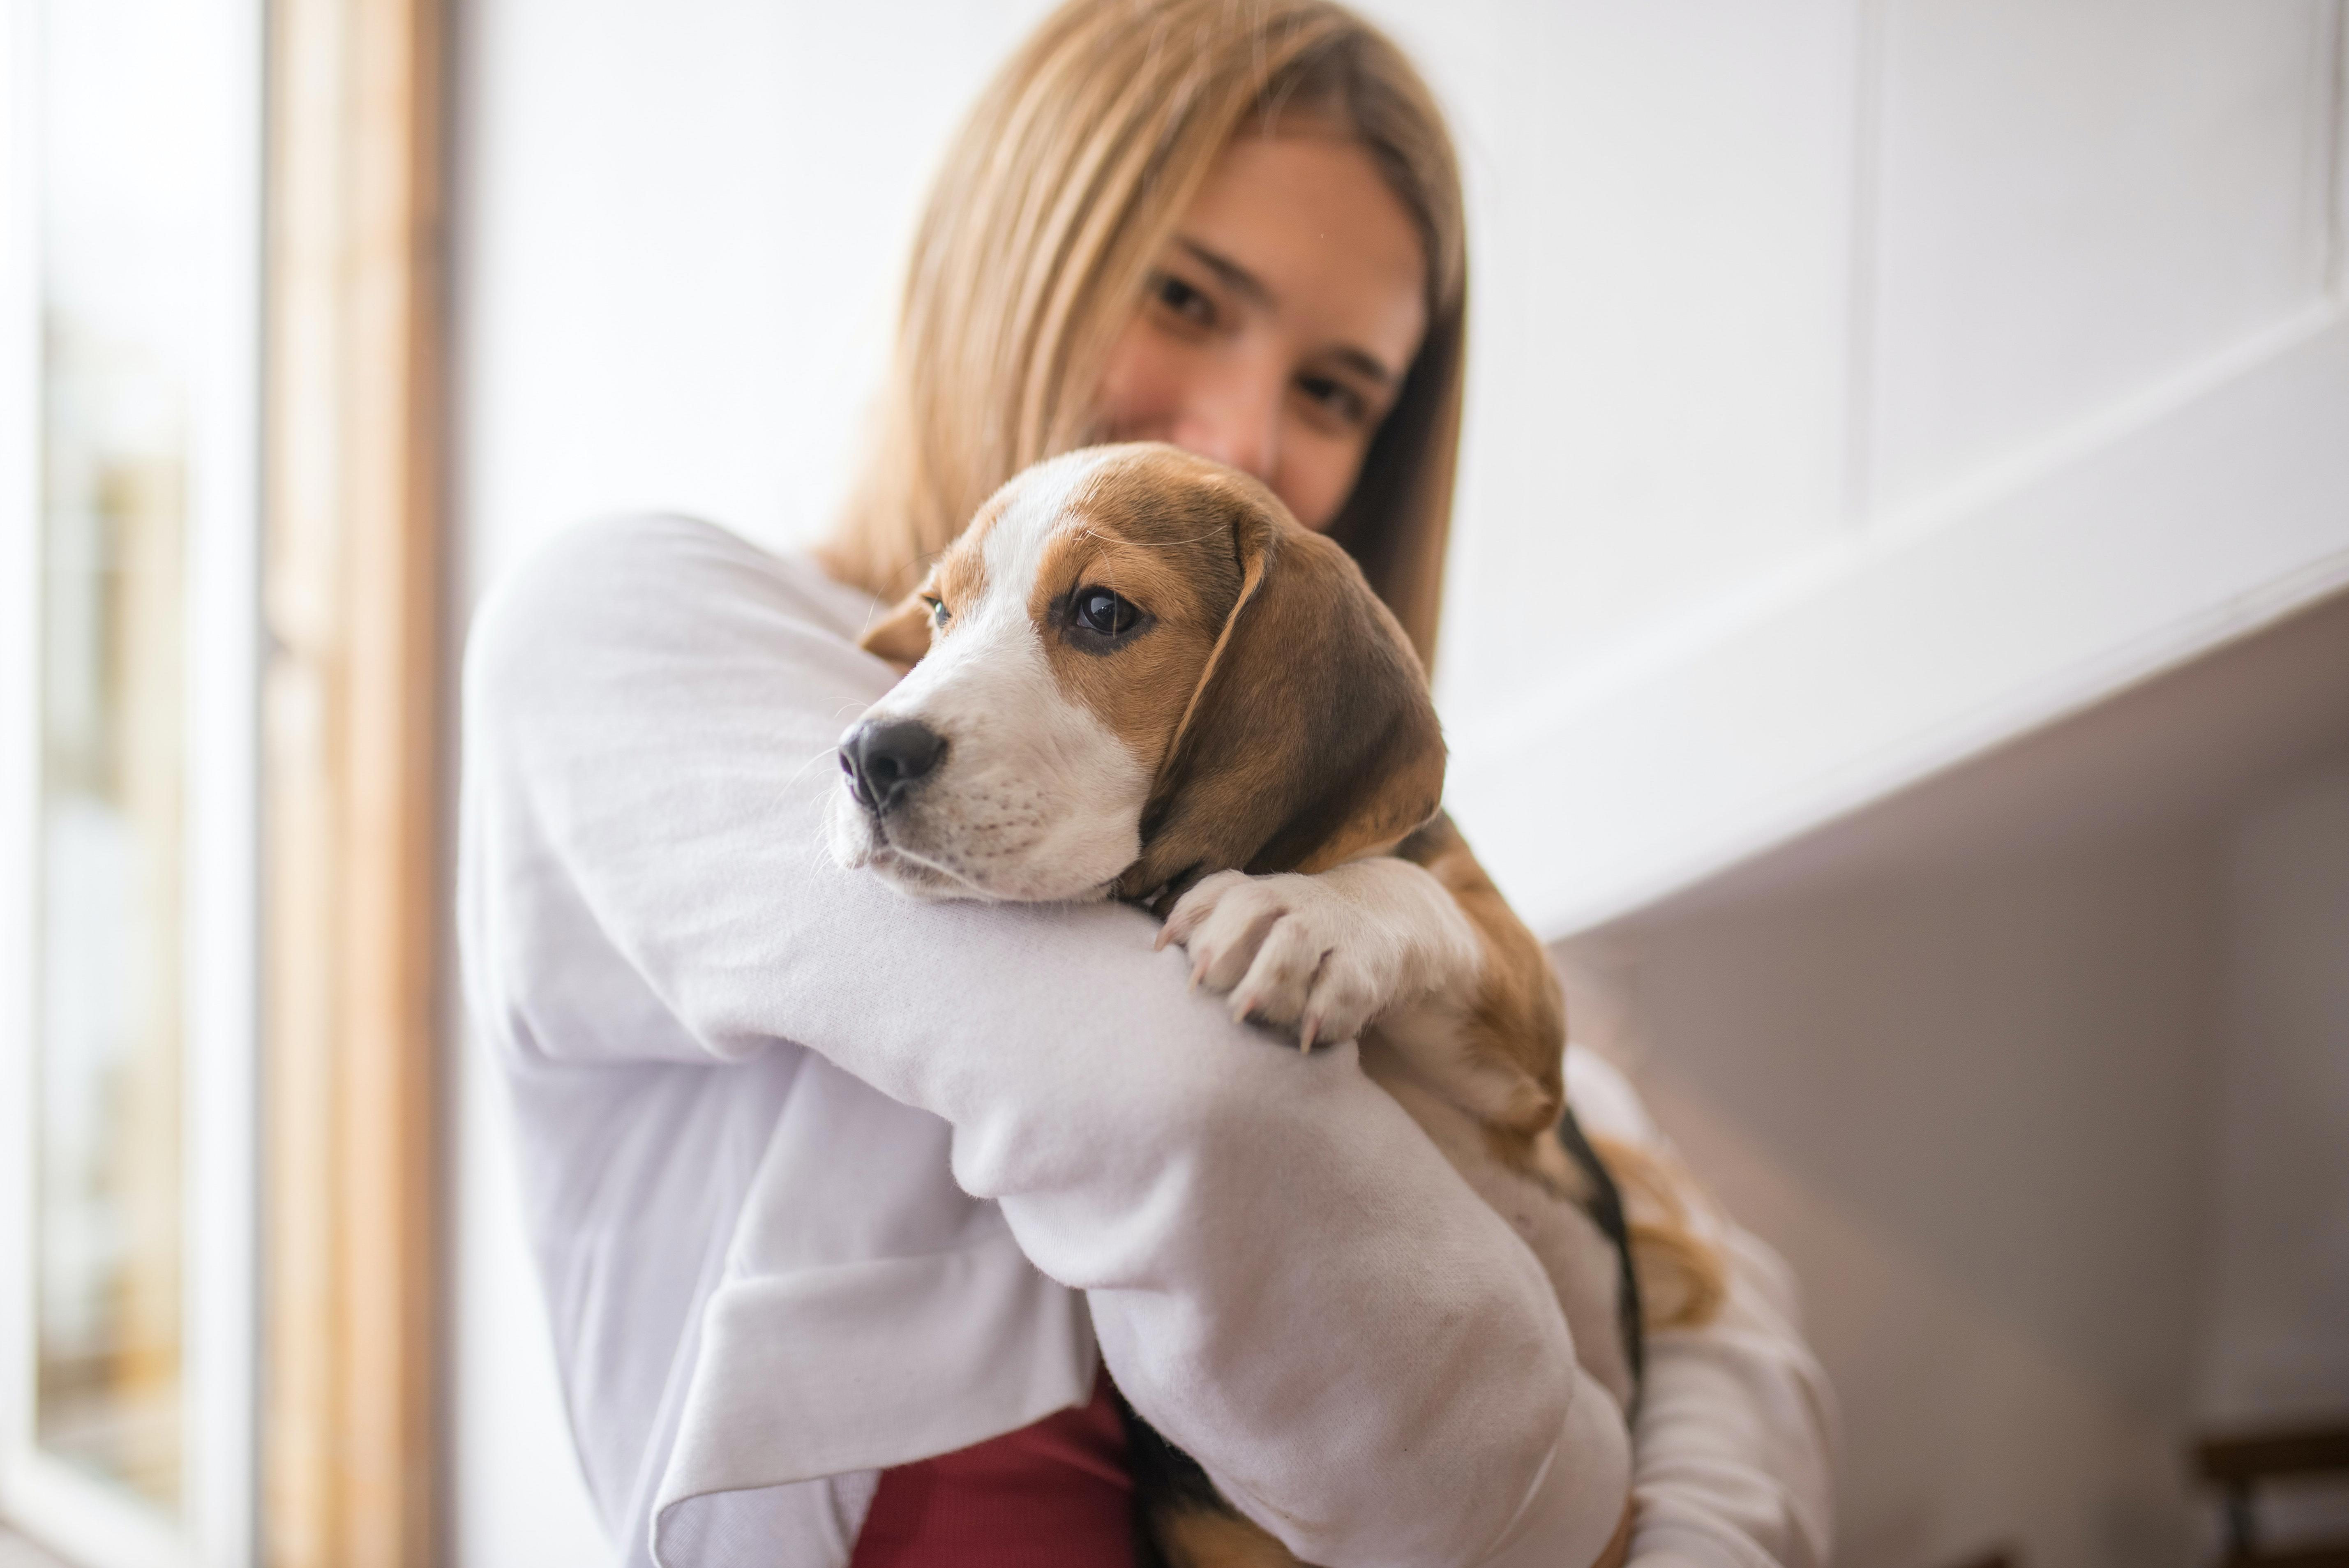 5 Reasons to Get a Beagle: The Pros and Cons of Owning a Beagle